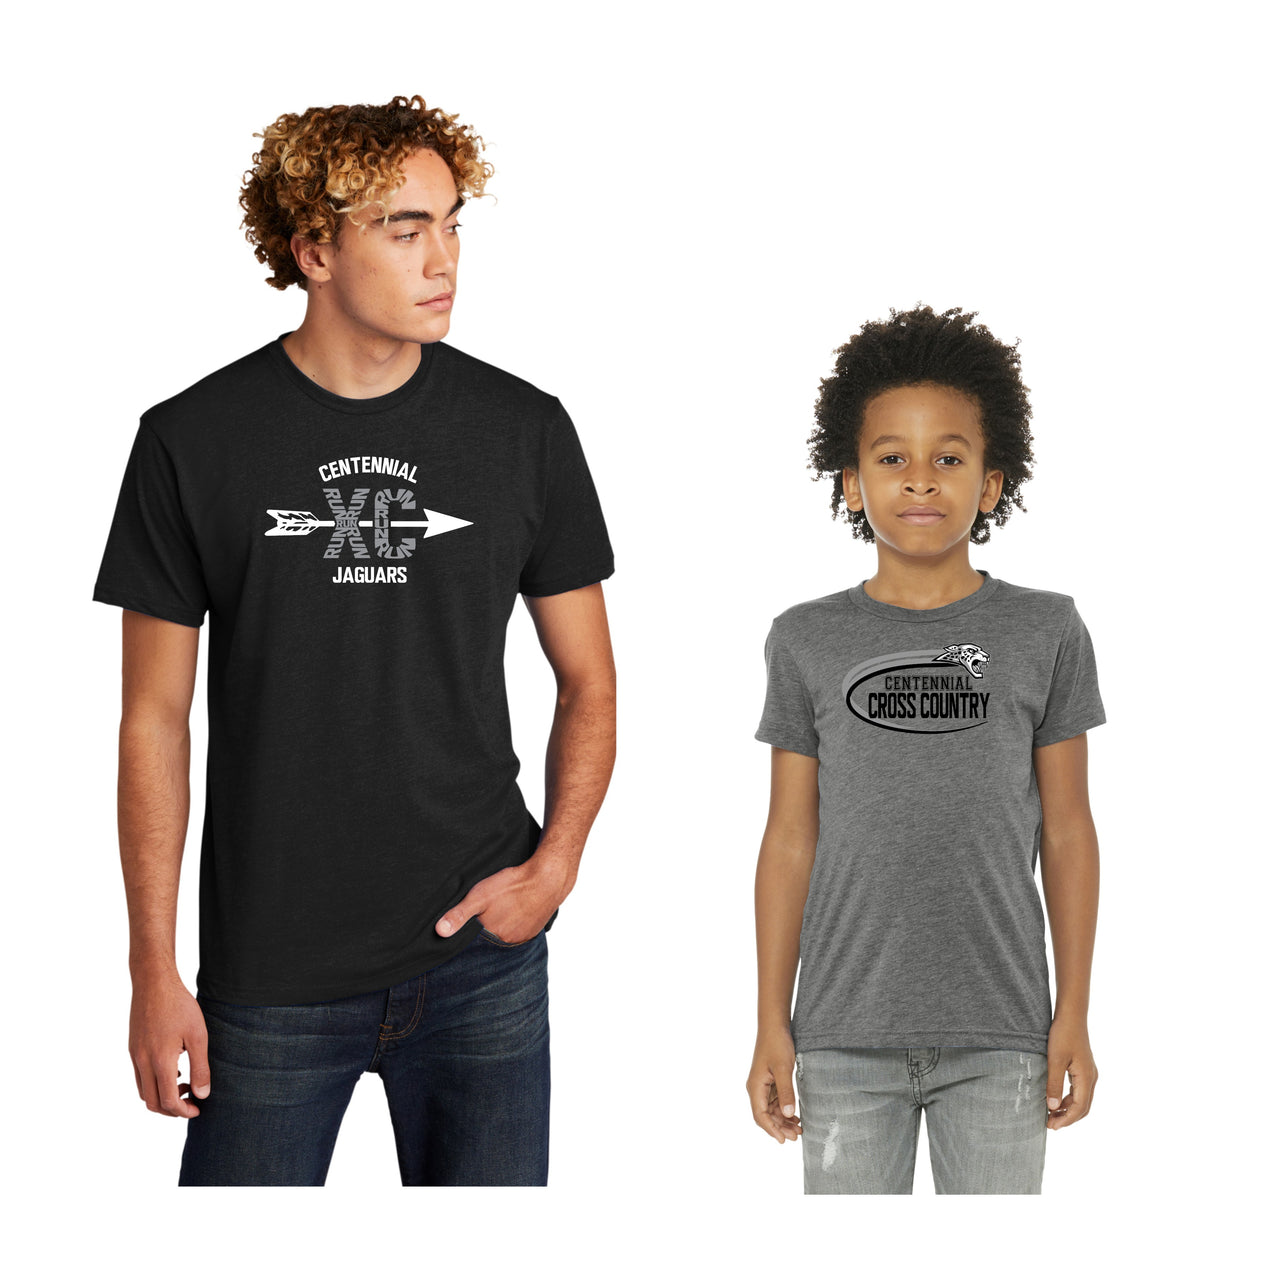 Adult & Youth - Unisex Tee (Jaguar Cross Country)